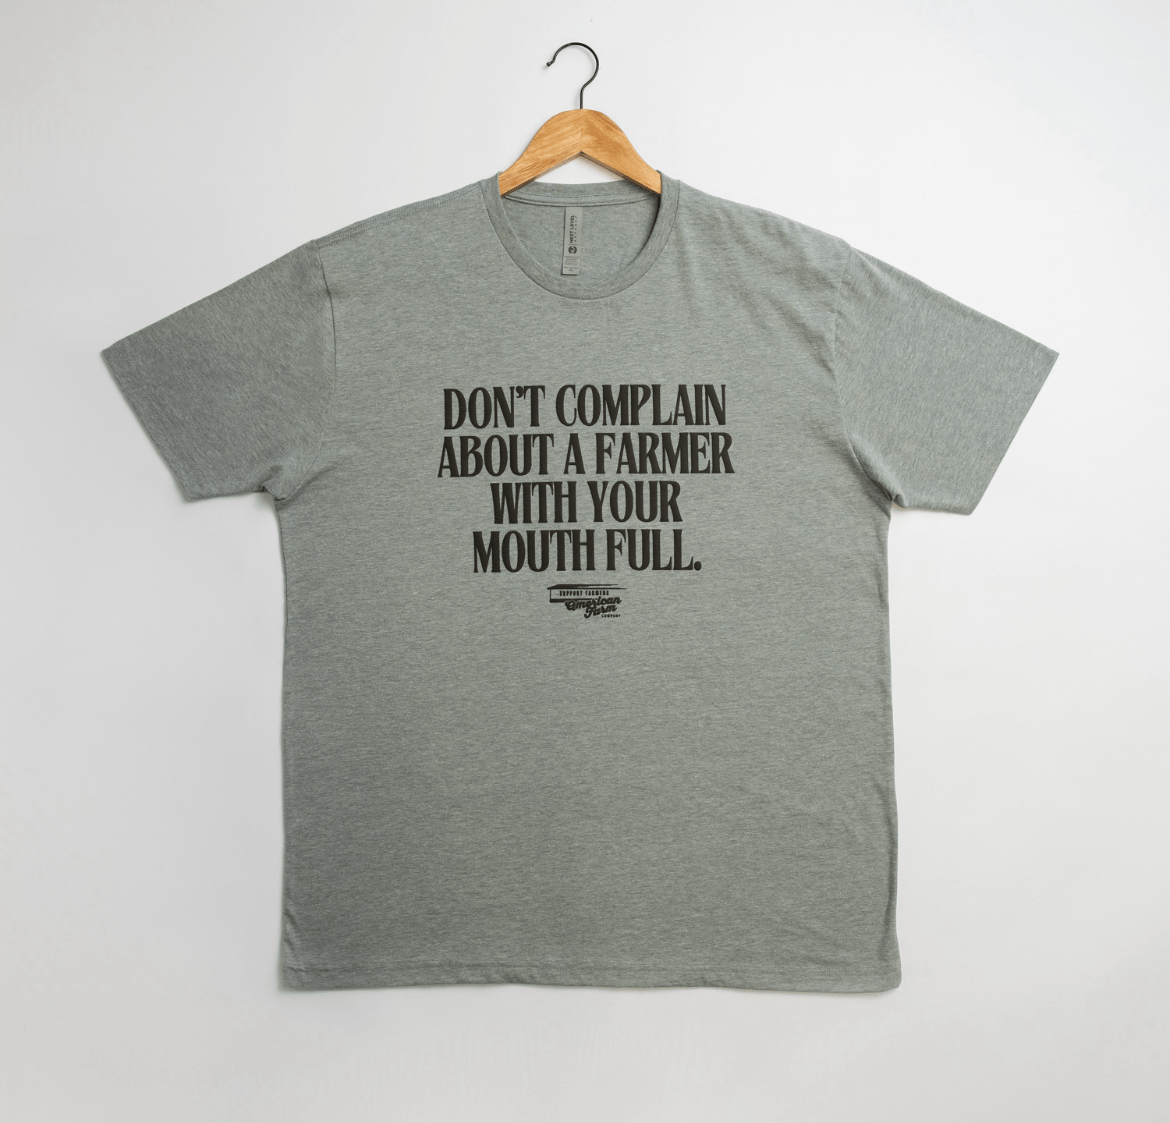 American Farm Company Shirts 'Don't Complain about a Farmer with your Mouth Full' Tee